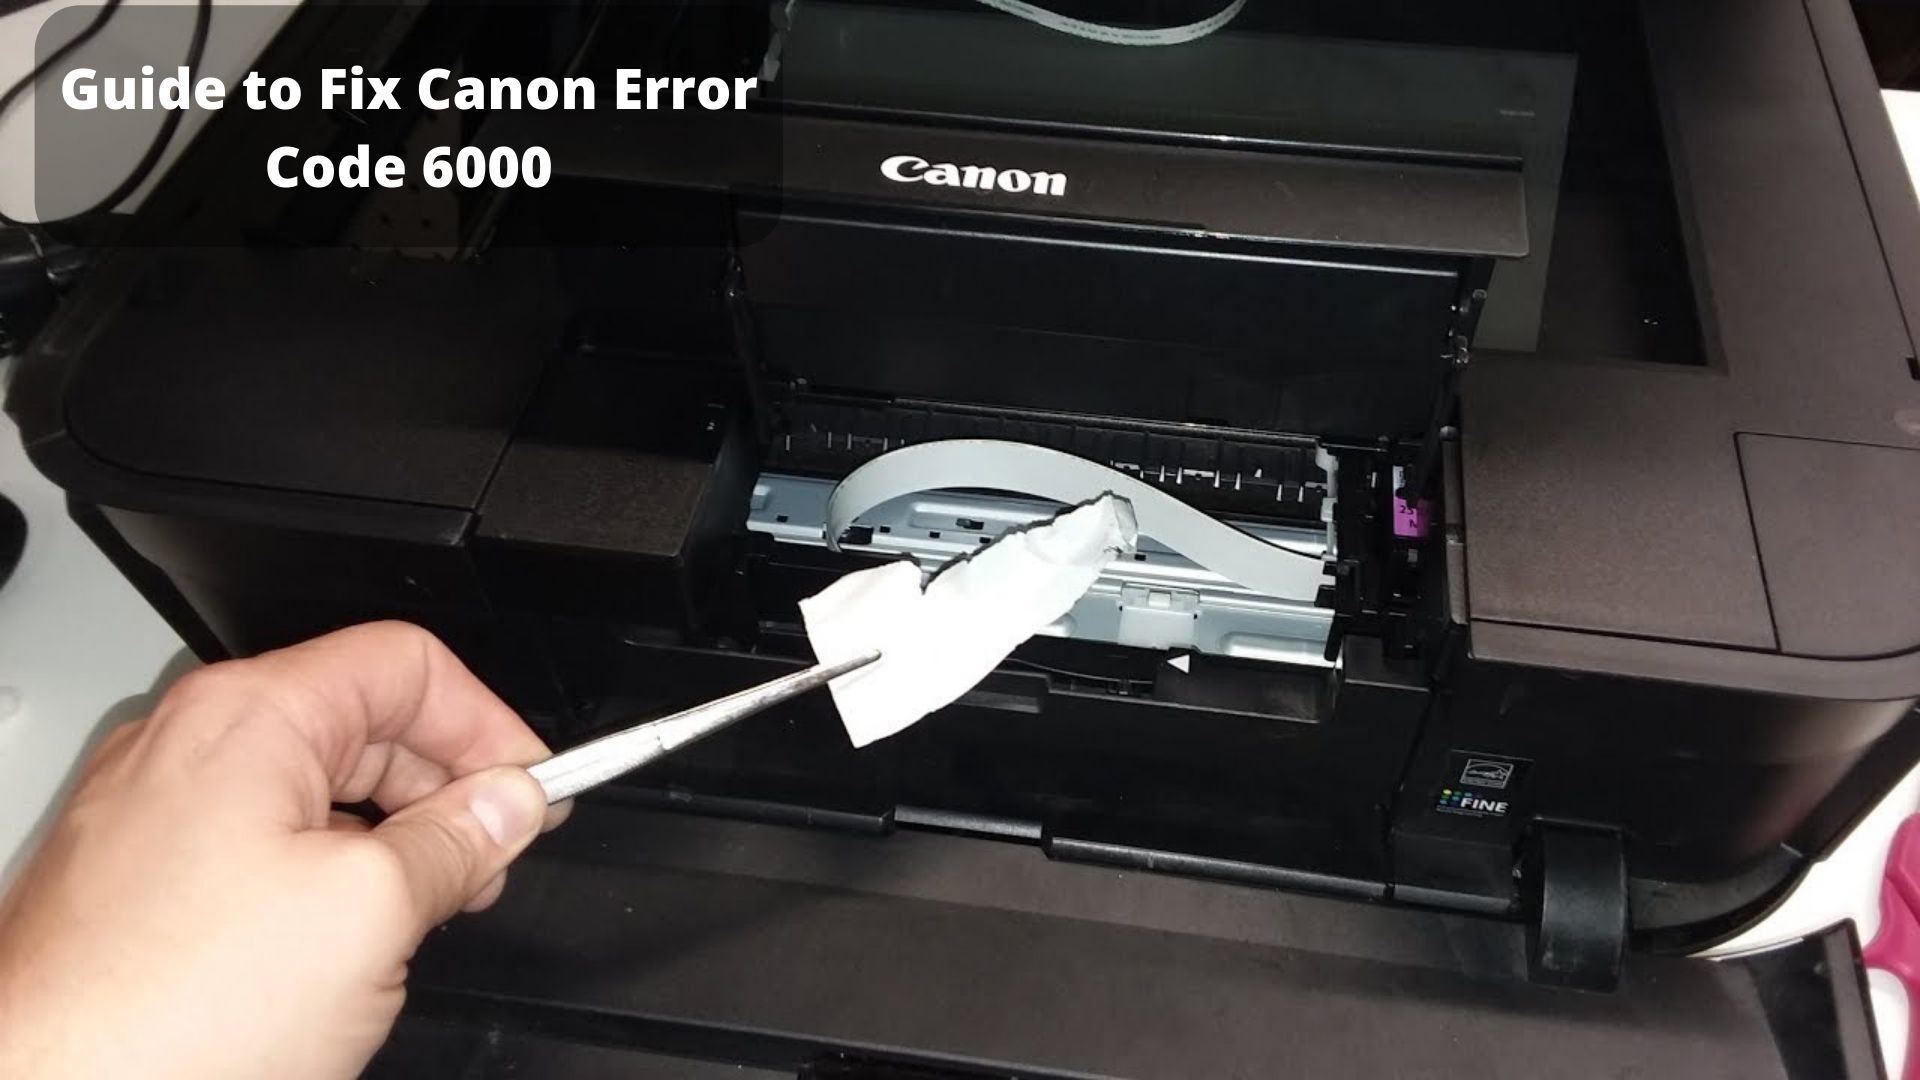 Troubleshooting Guide to Fix Canon Error Code 6000